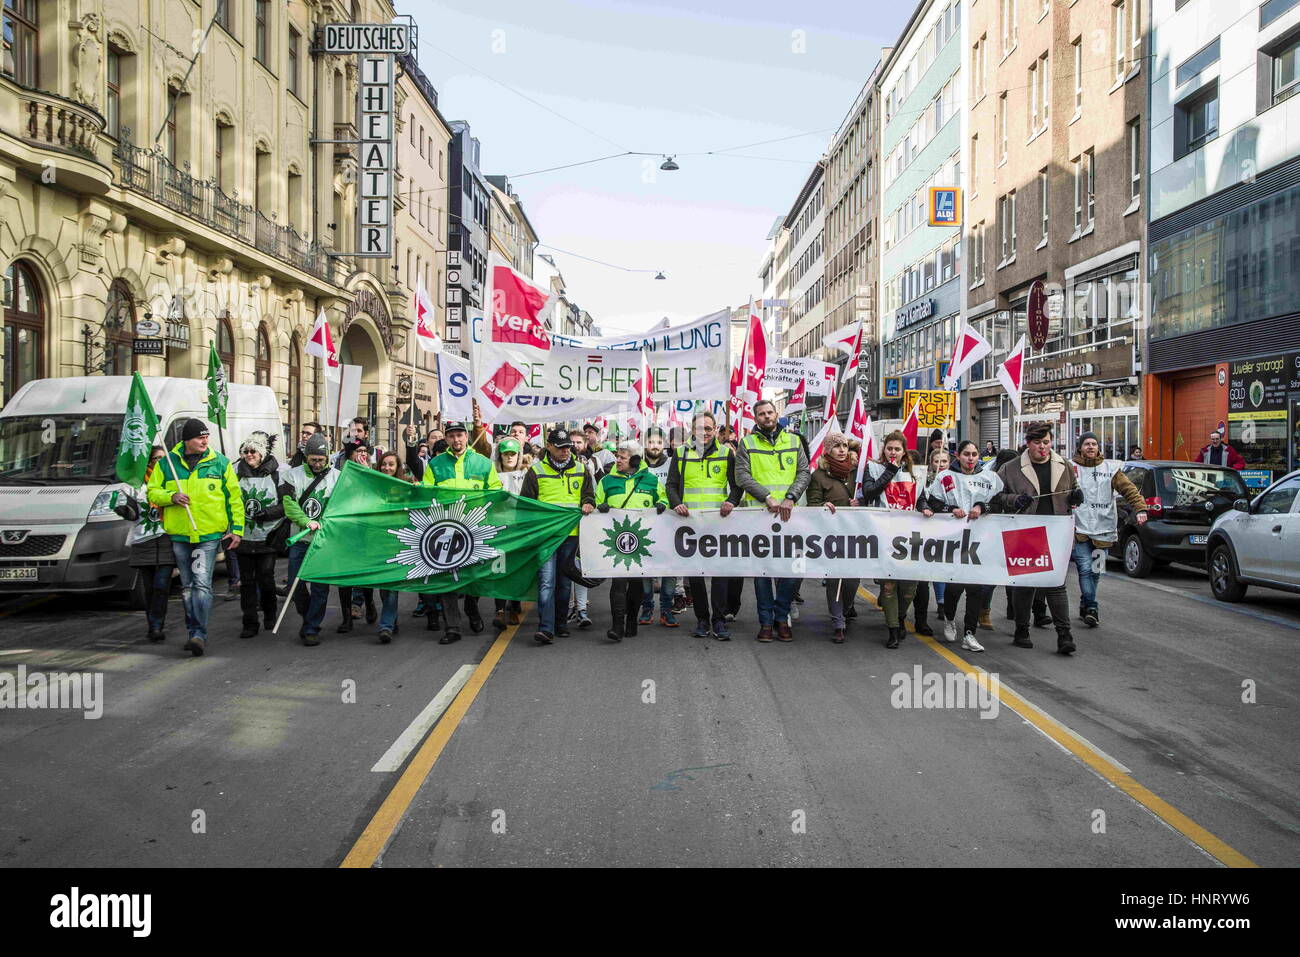 February 14, 2017 - MÃ¼Nchen, Bayern, Germany - The Ver.di and police unions called for a warning strike today in Munich in a series of strikes in Germany. Included in the strike are workers of the TU and LMU universities, Deutsches Museum, courts, hospitals, Bayerische Staatsoper, Bayerisches Schauspiel, and others including highway workers. The demonstration start was at the Gewerkschaftshaus on Schwanthalerstrasse and ended at the famed Geschwister-Scholl-Platz at the LMU university. Police are demanding a raise of 6% and modifications to the training structures. The third round of disc Stock Photo